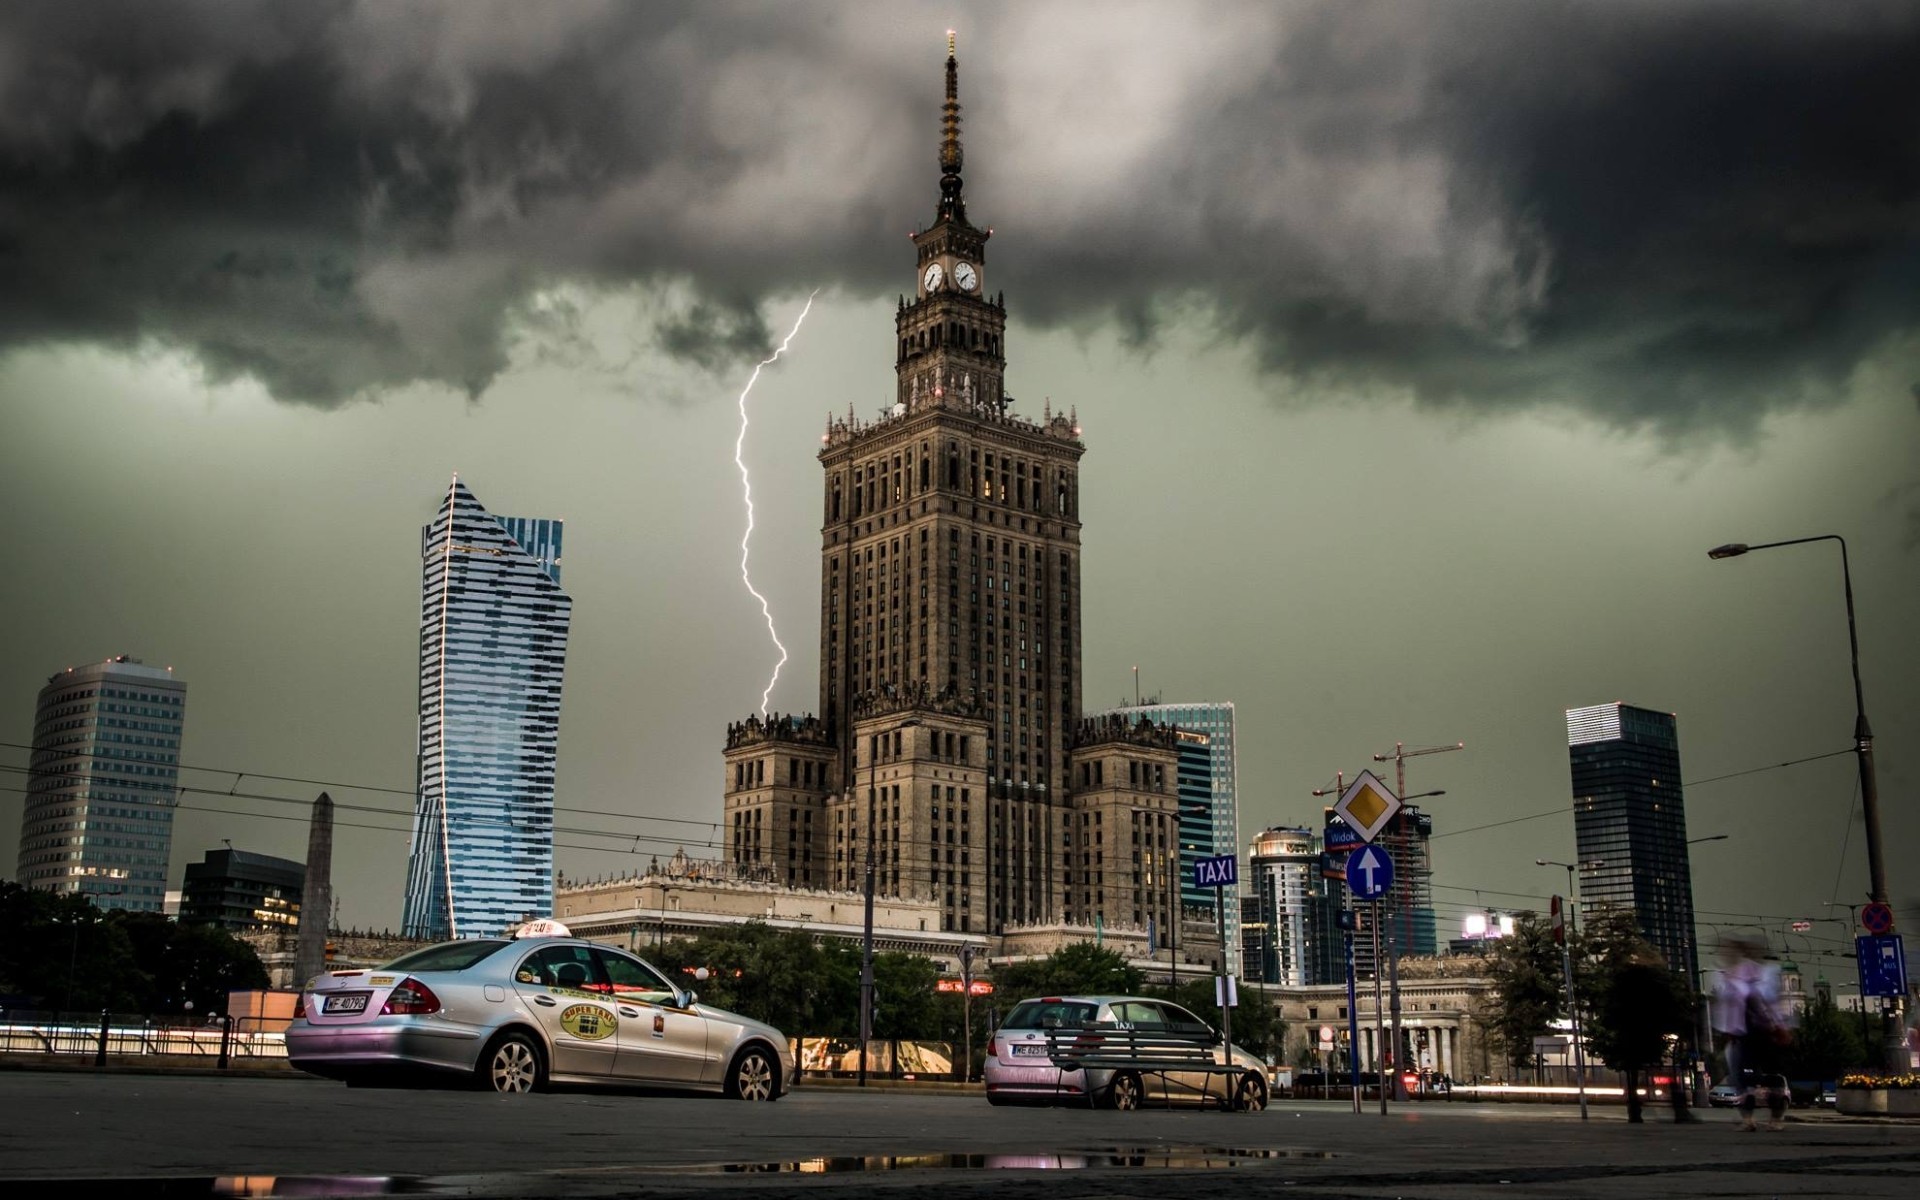 City Cityscape Clouds Lightning Building Architecture Car Clock Tower Warsaw Poland Poland Polish Pa 1920x1200